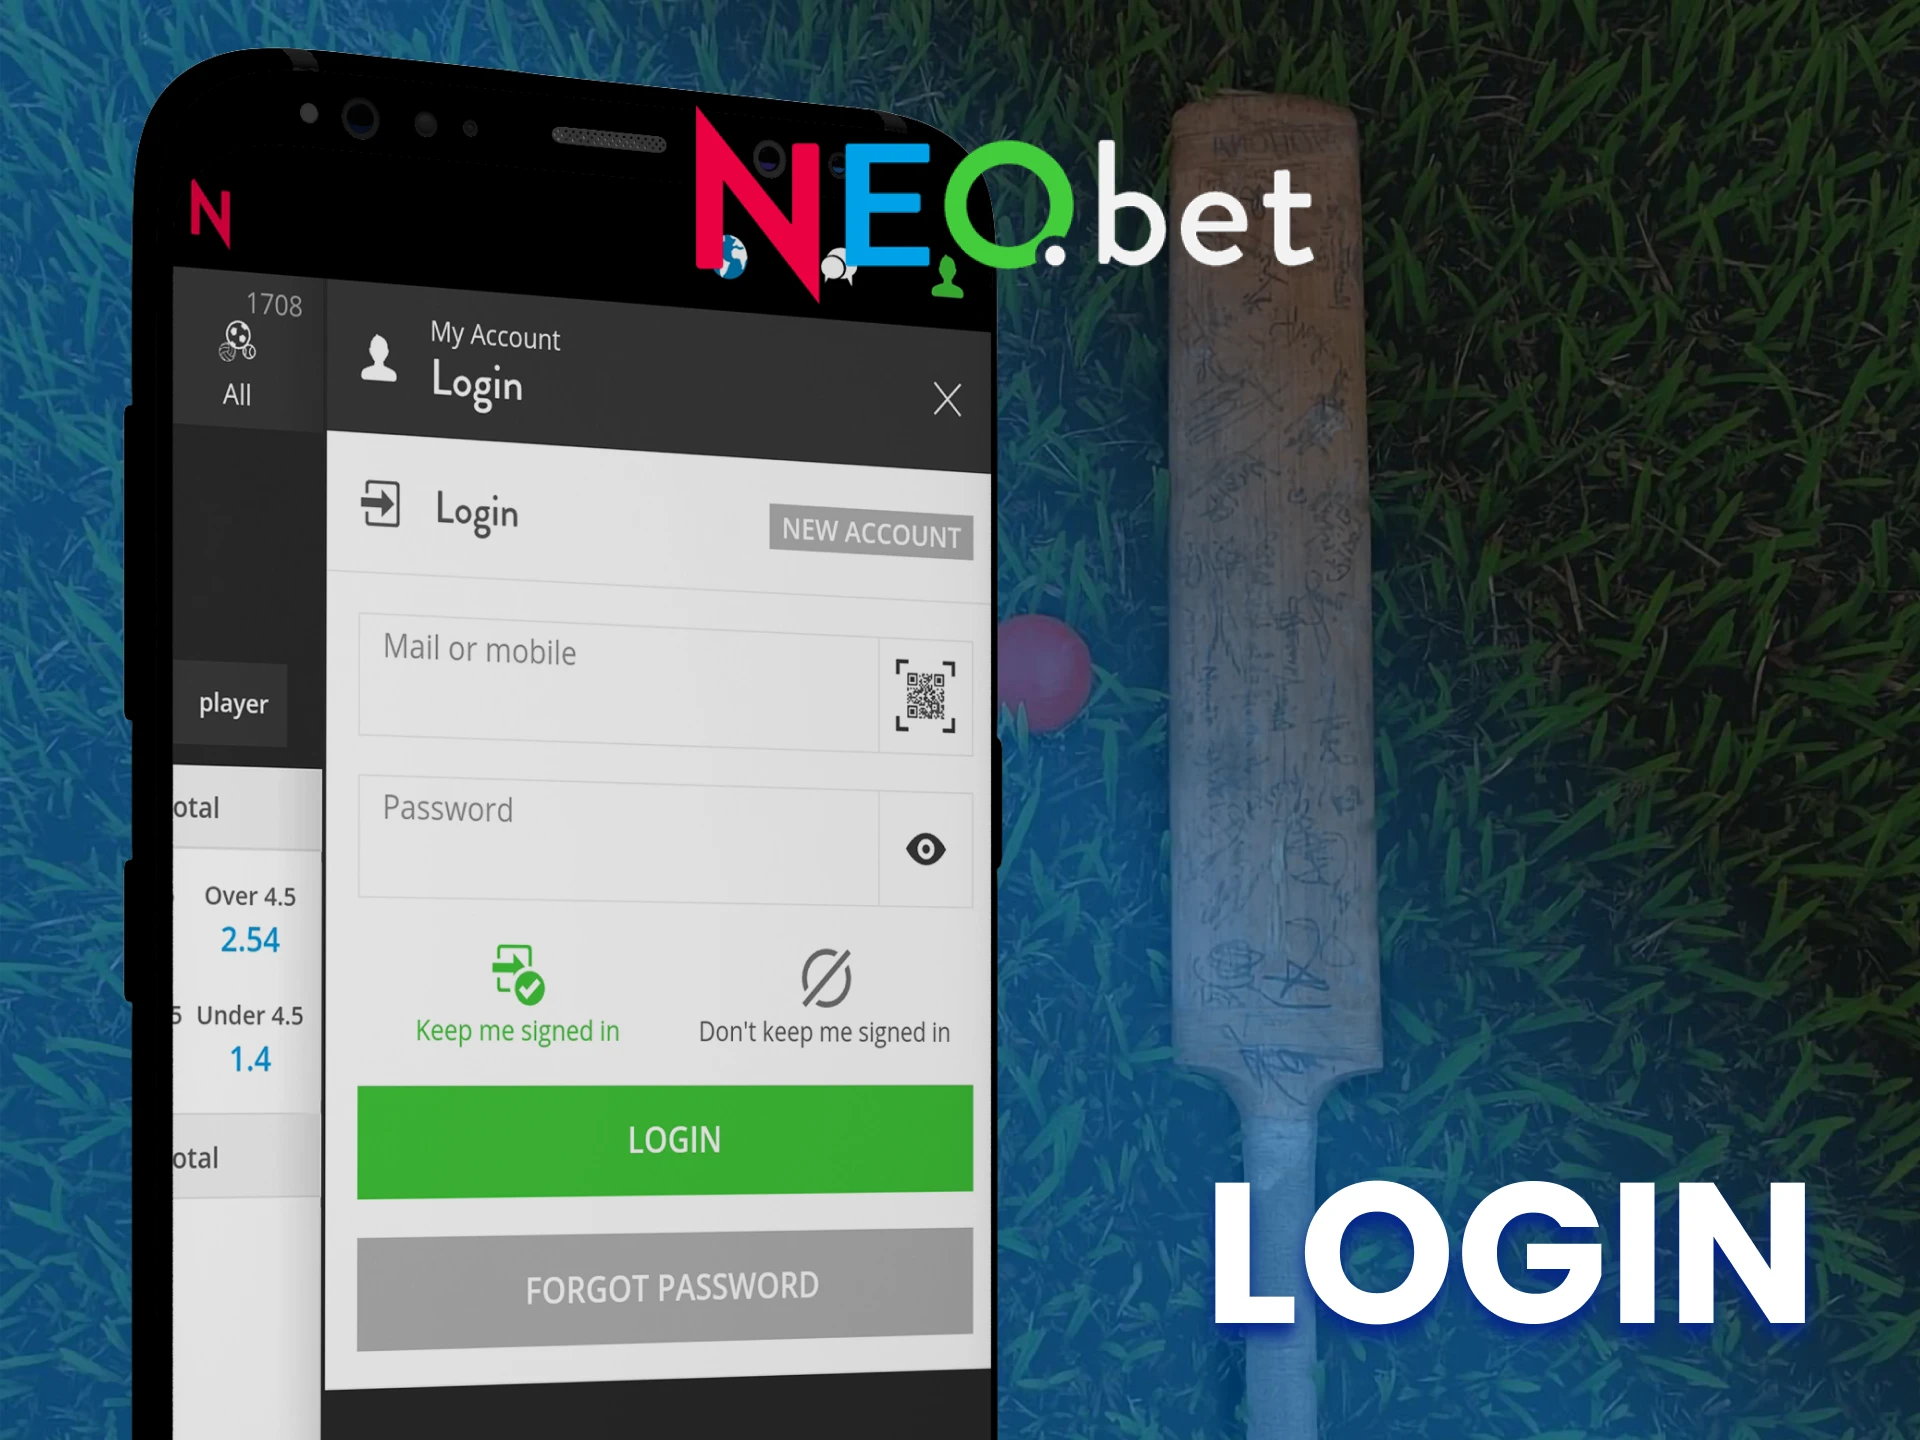 Log in to your account on the NEO.bet app.